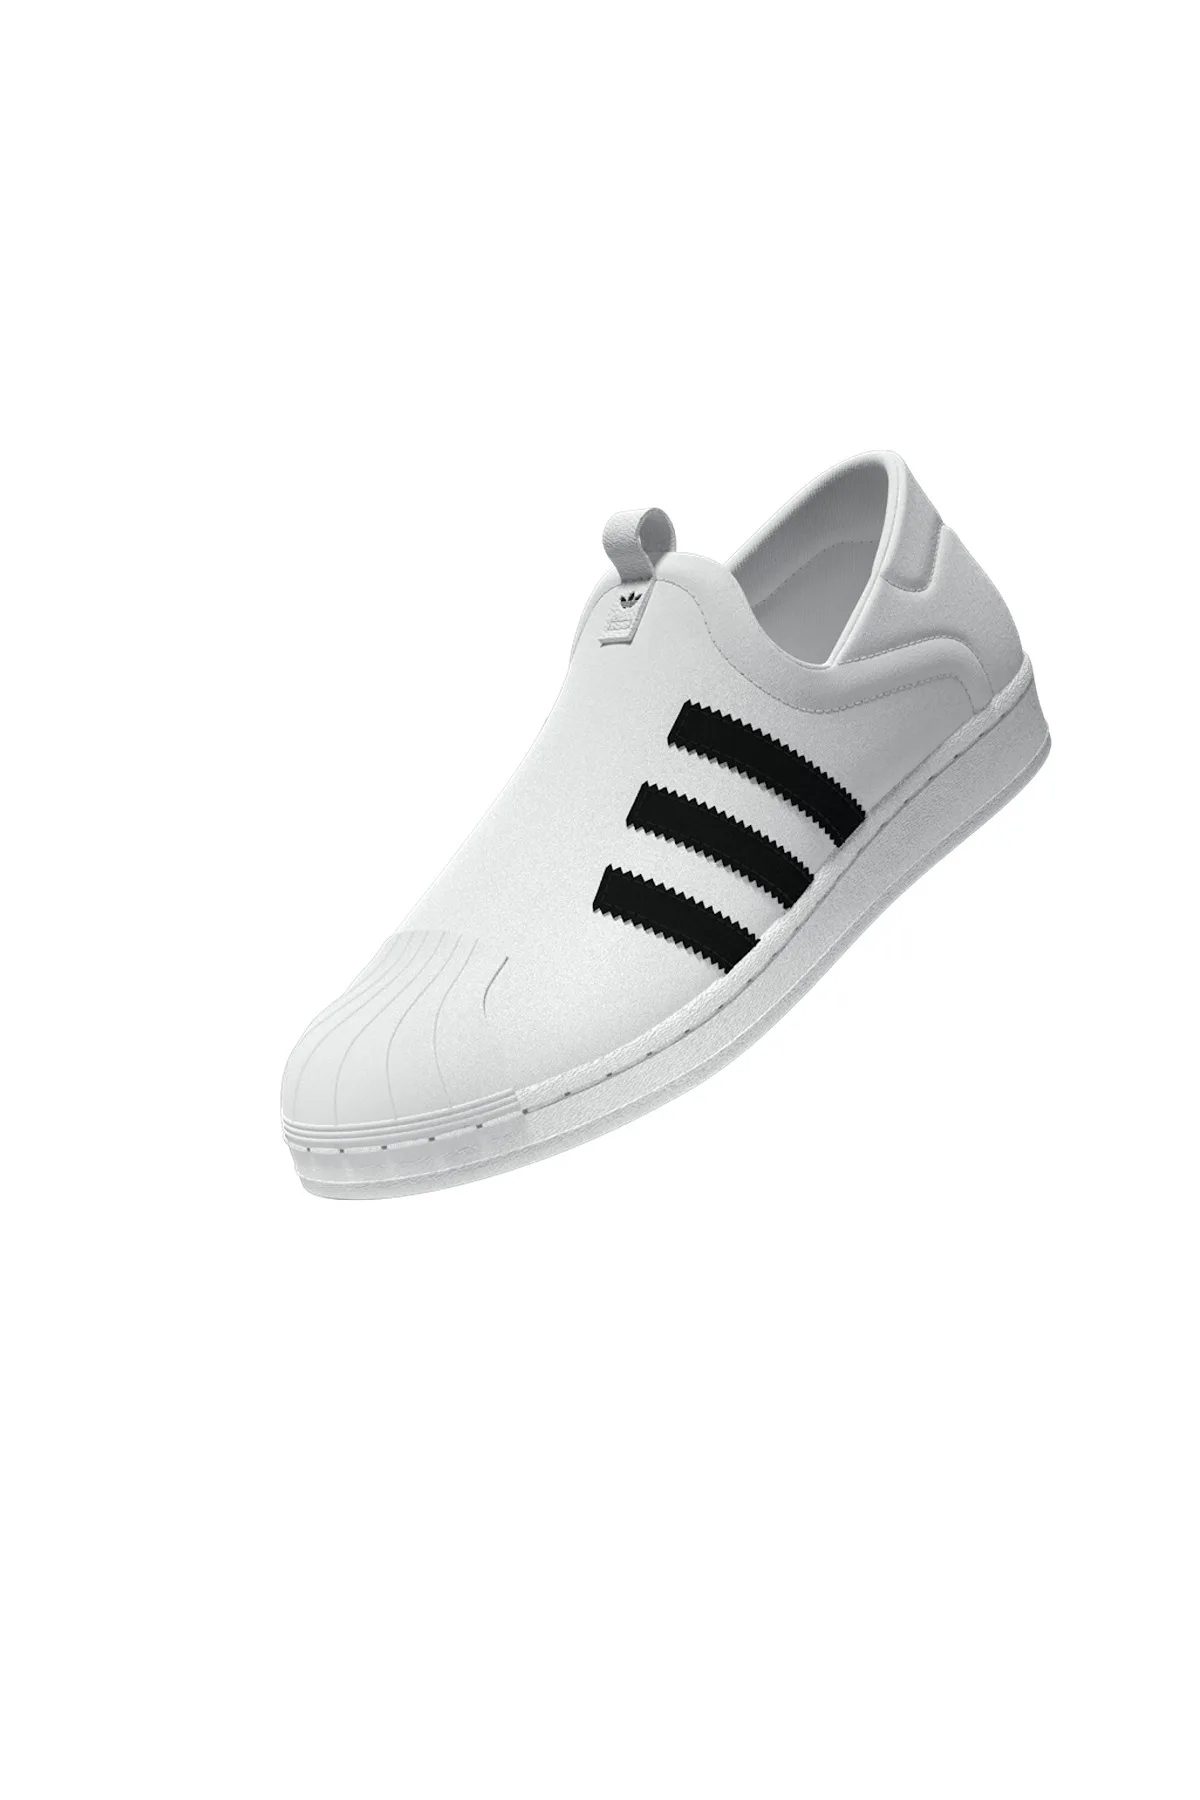 Women’s adidas slip on shoes: The Fusion of Comfort and Style插图4